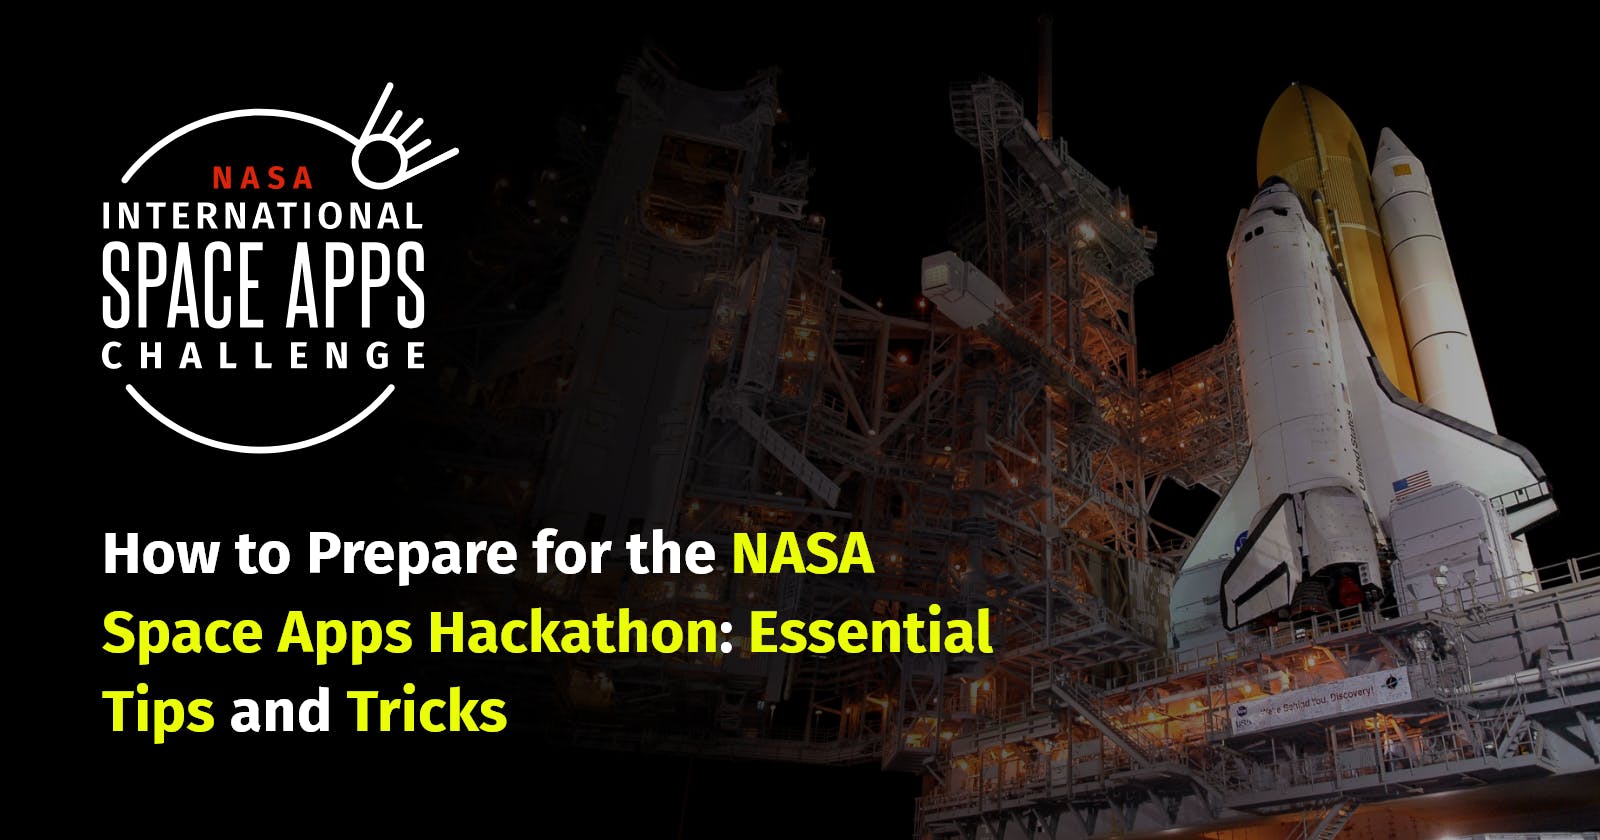 How to Prepare for the NASA Space Apps Hackathon: Essential Tips and Tricks